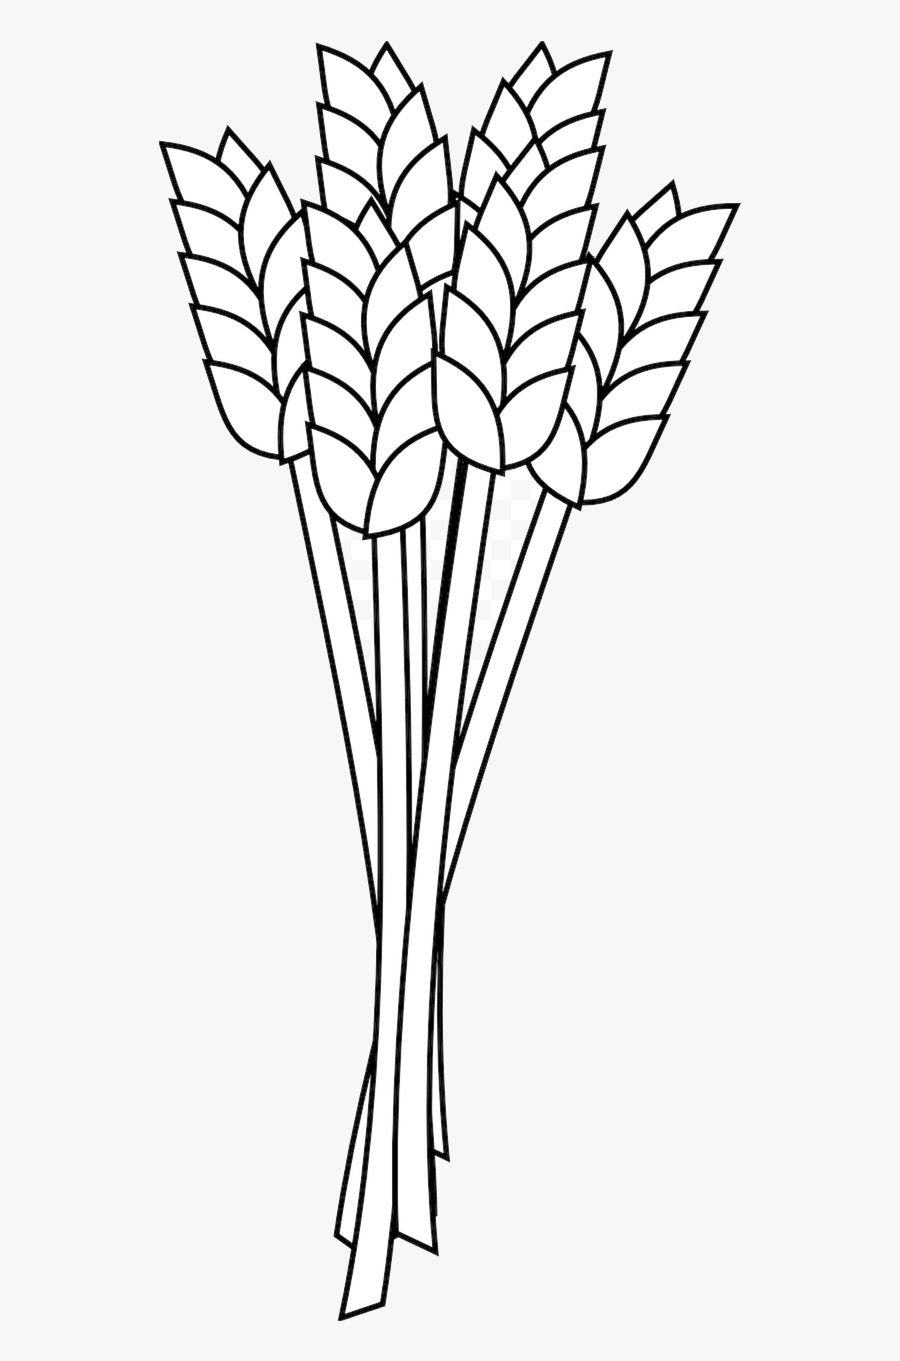 Wheat Freeuse Stock Flour Coloring Book Clipart Outline - Grains Clipart Black And White, Transparent Clipart